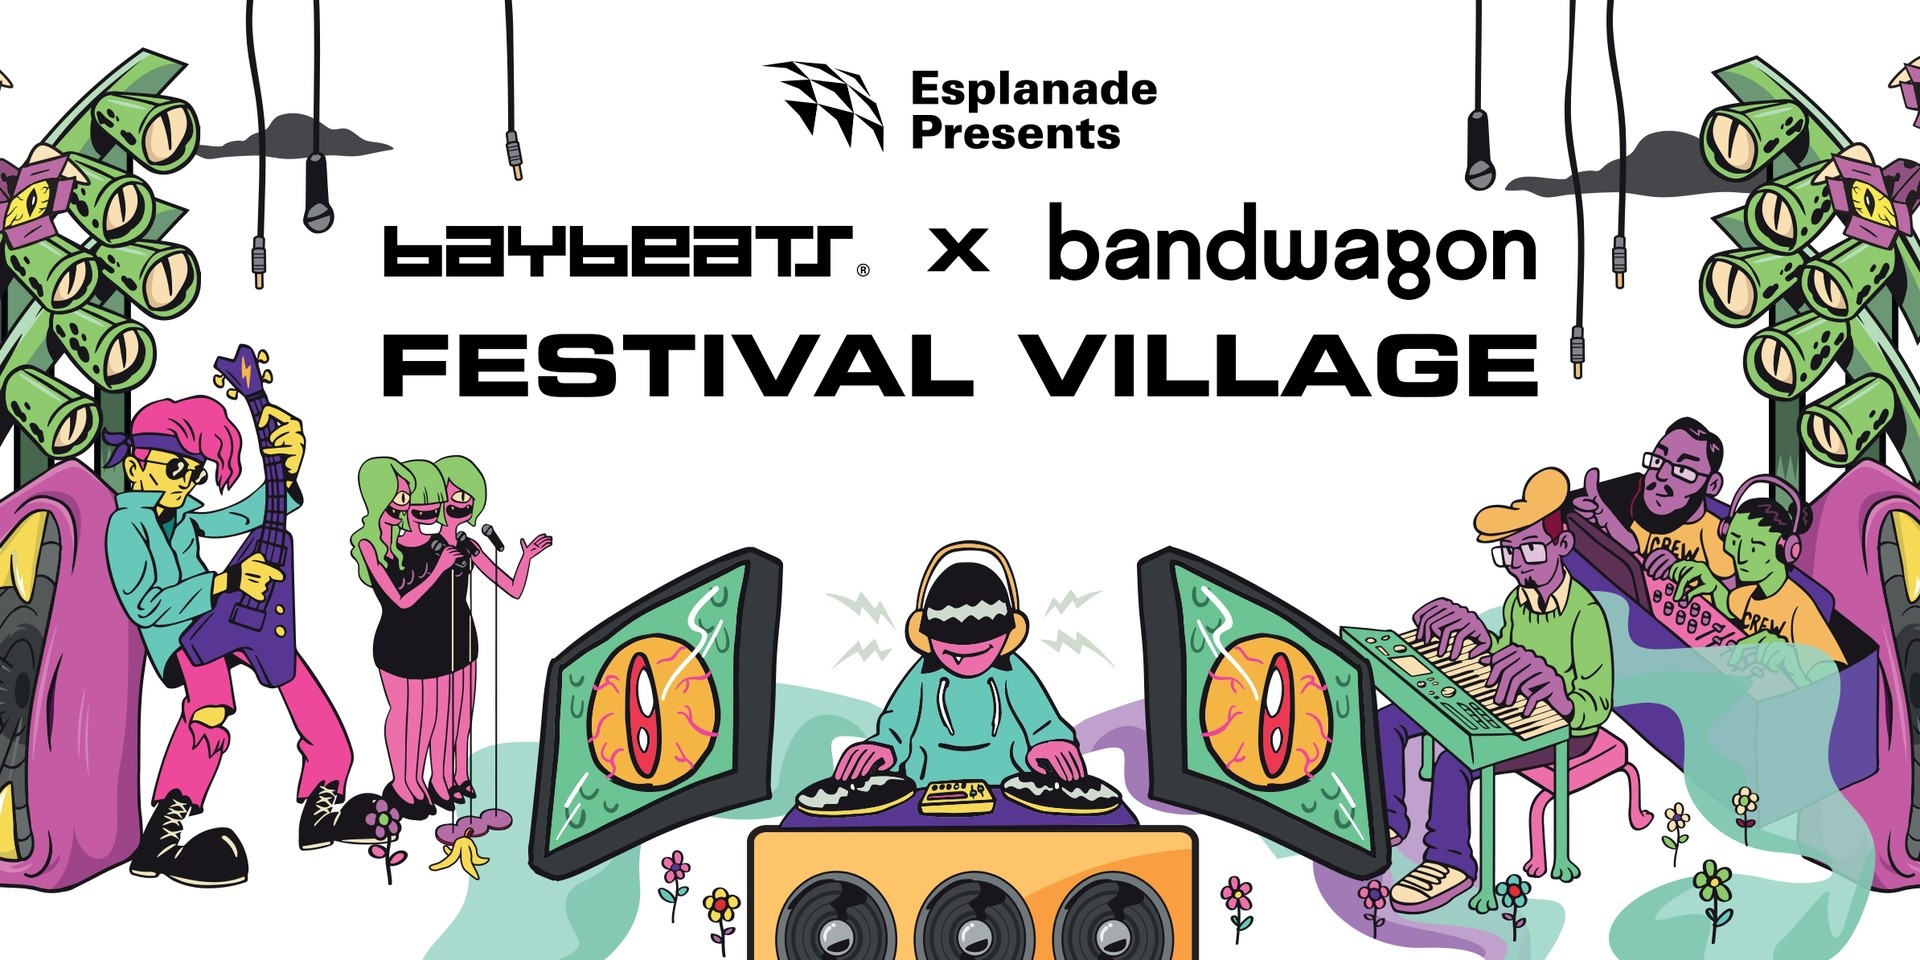 All you need to know about the Baybeats x Bandwagon Festival Village